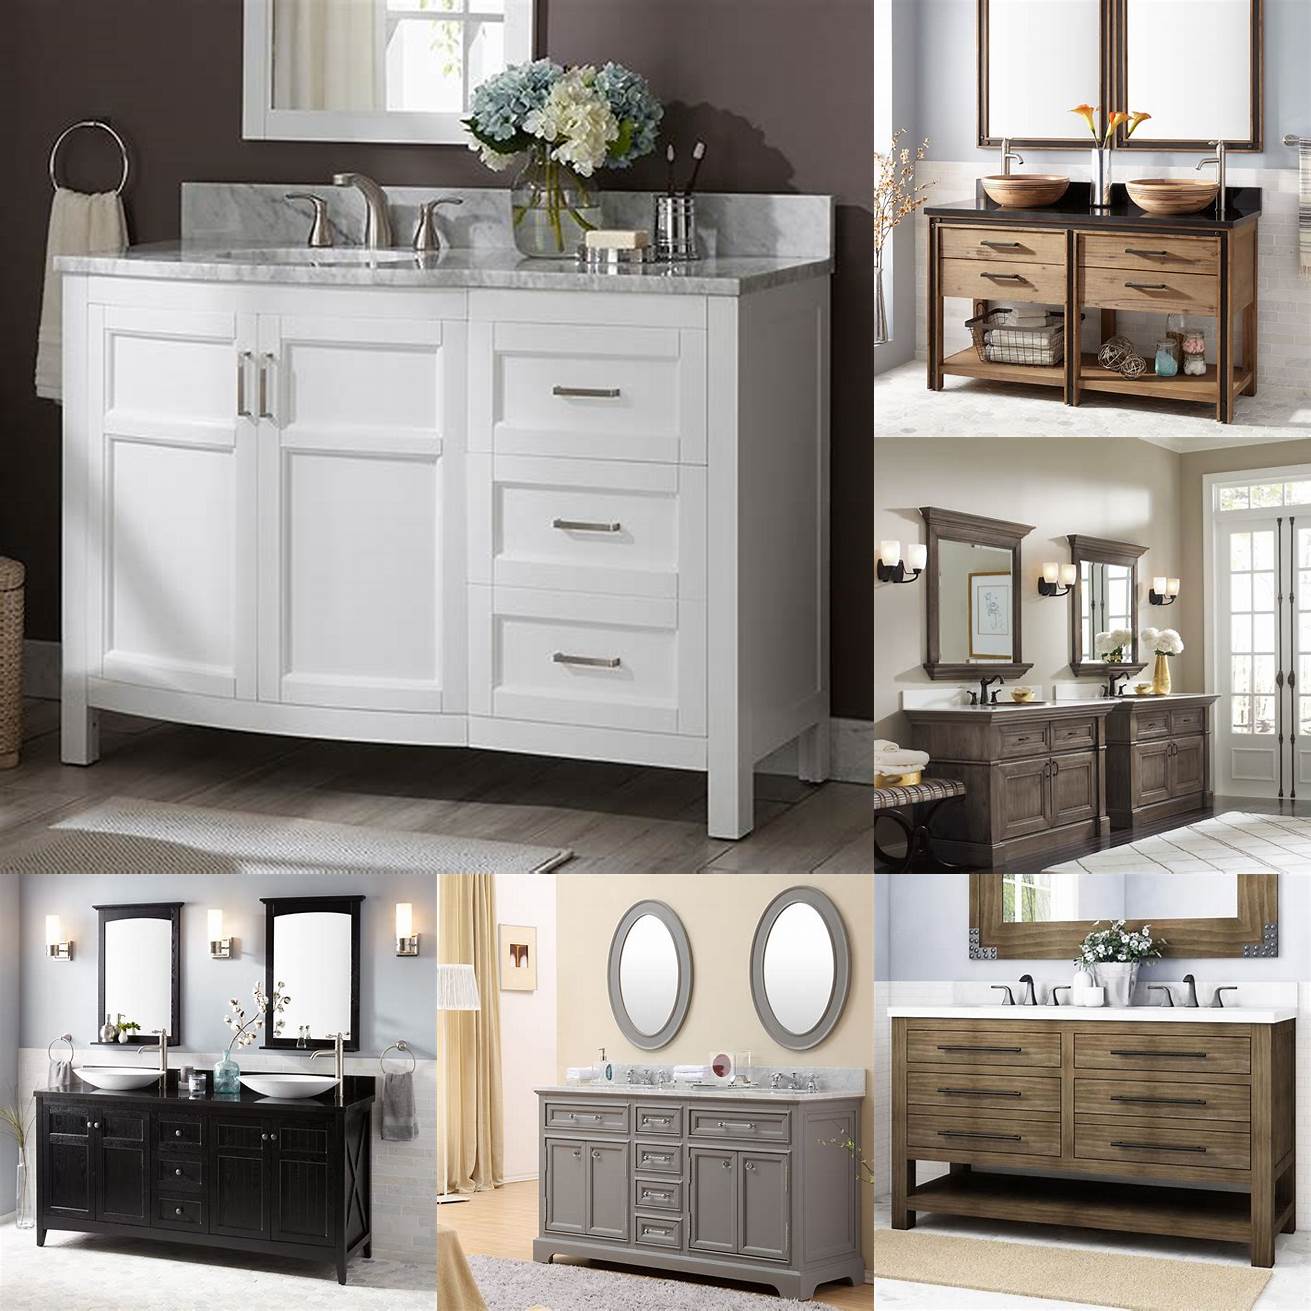 2 Wide Selection Overstock has a large selection of bathroom vanities in various styles colors and sizes